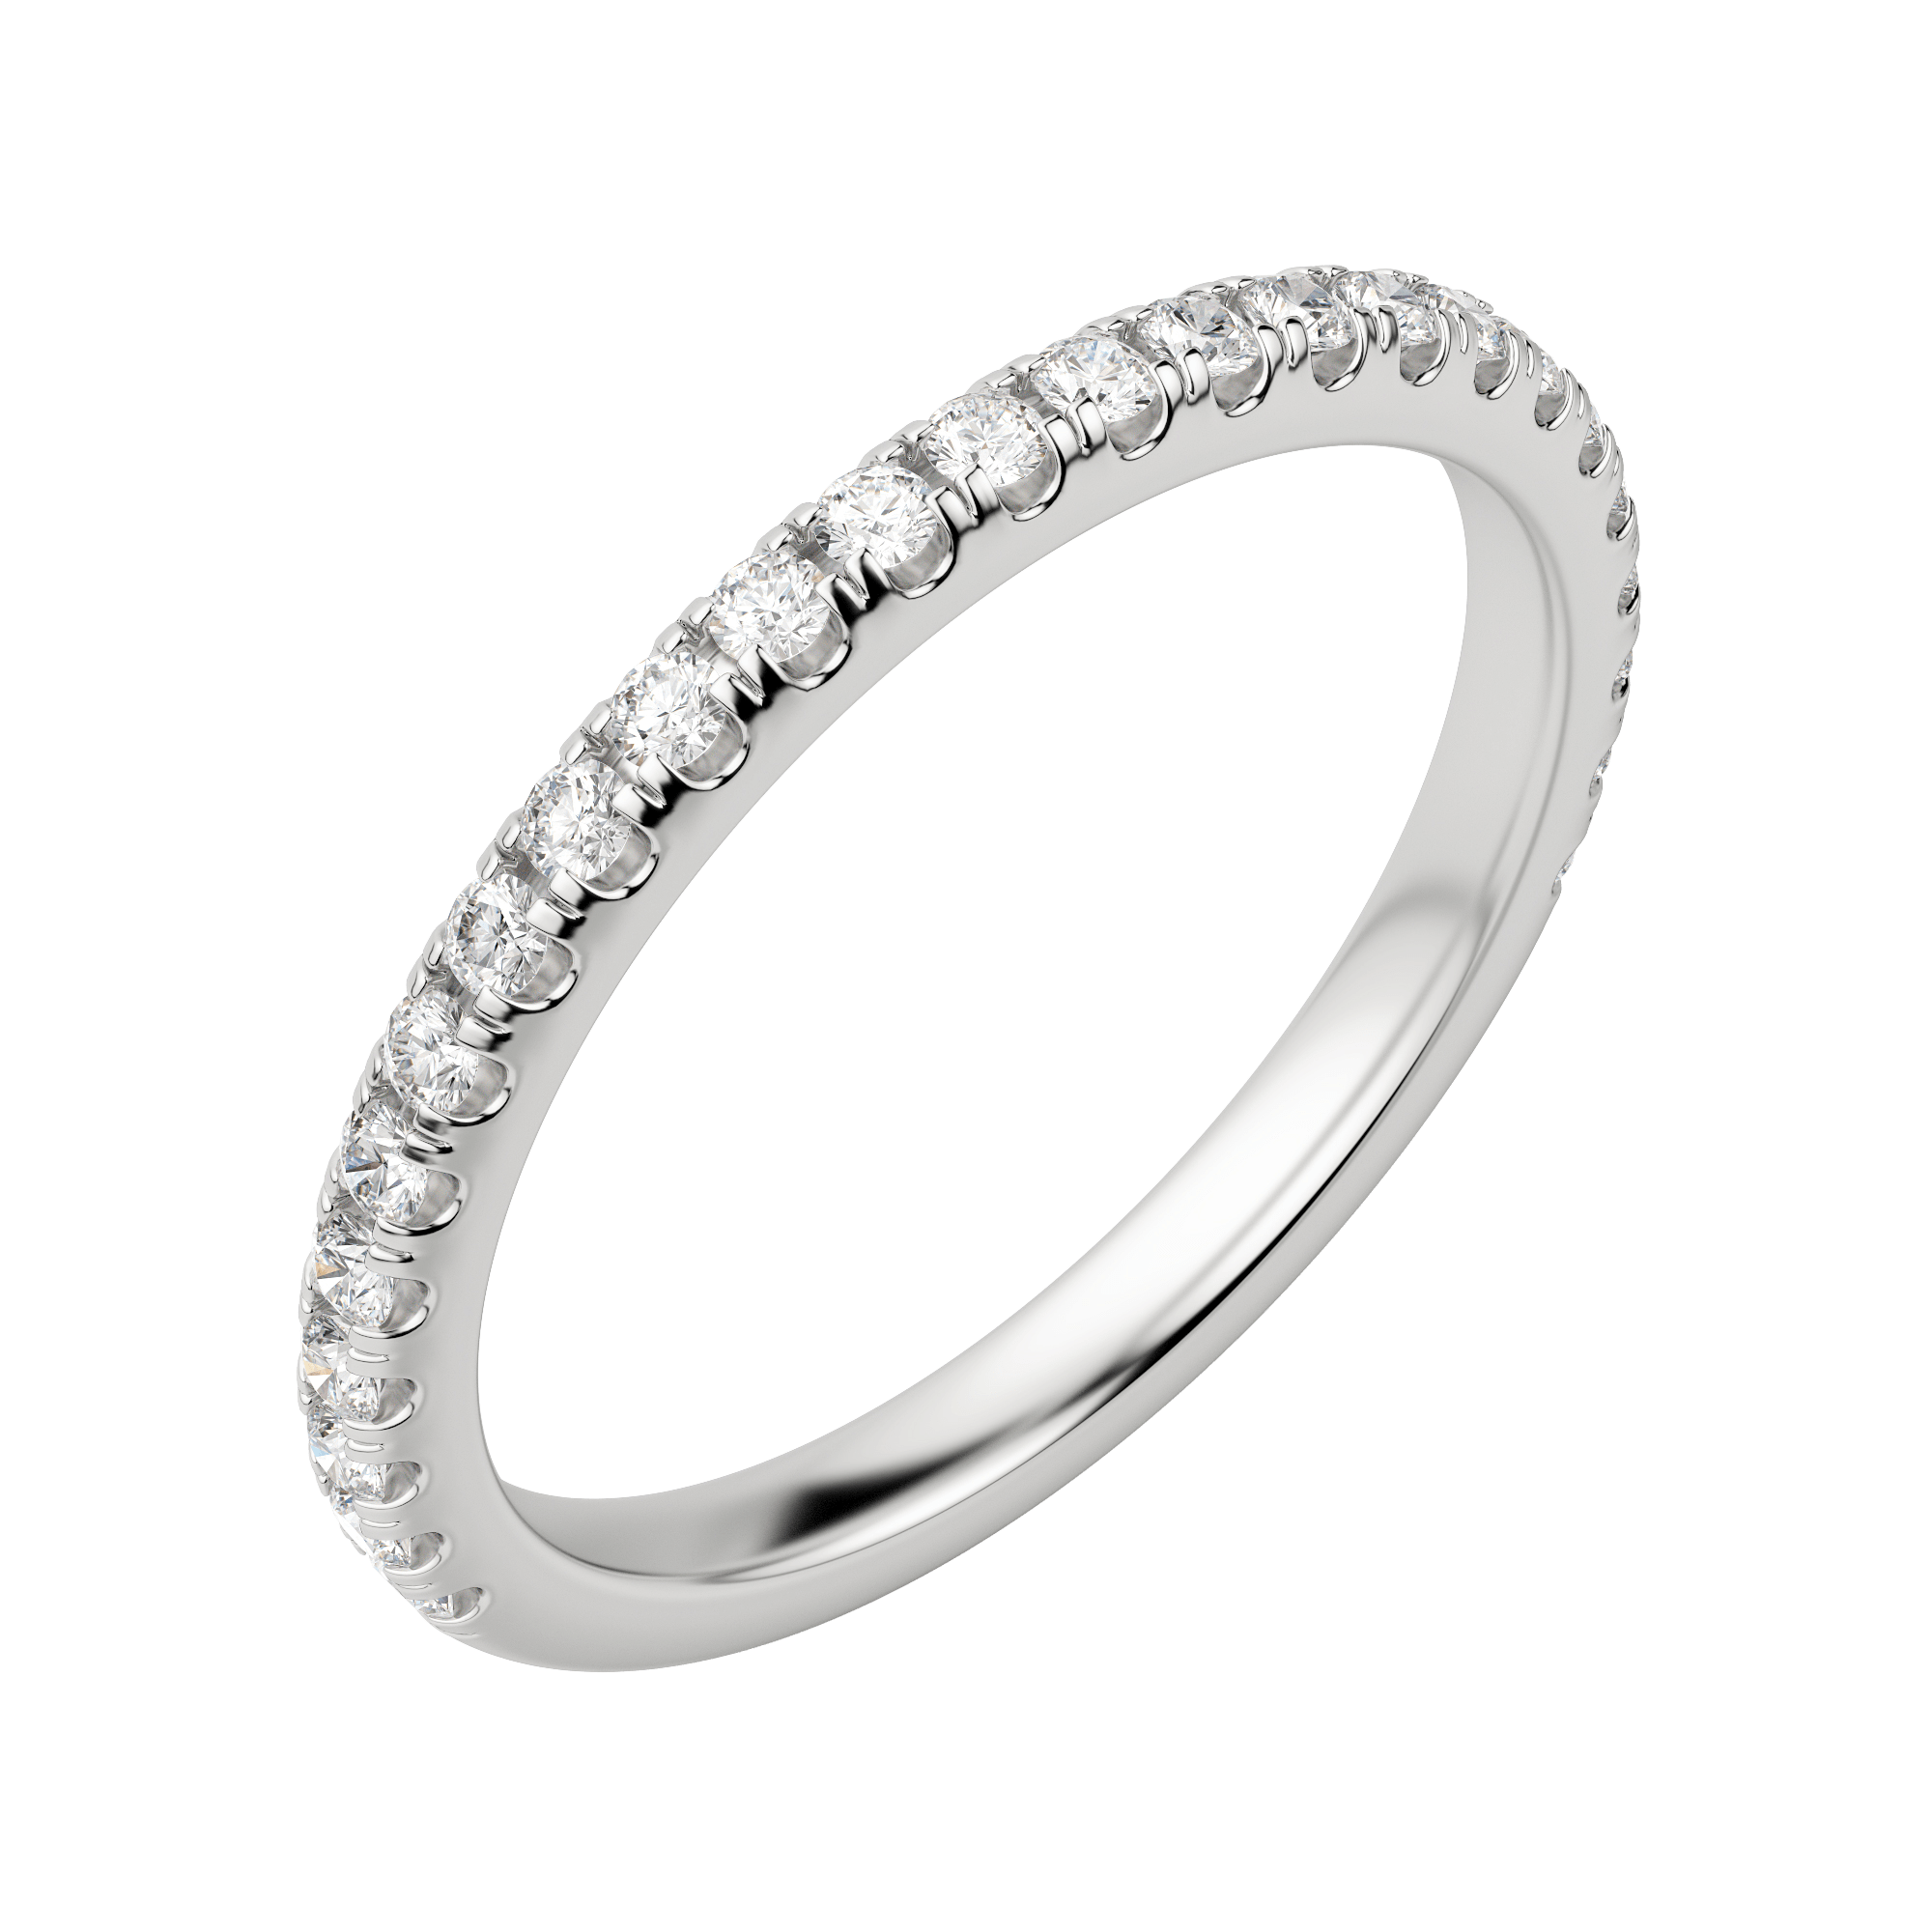 Edgy Accented Wedding Band, Default, 18K White Gold, Platinum,\r
